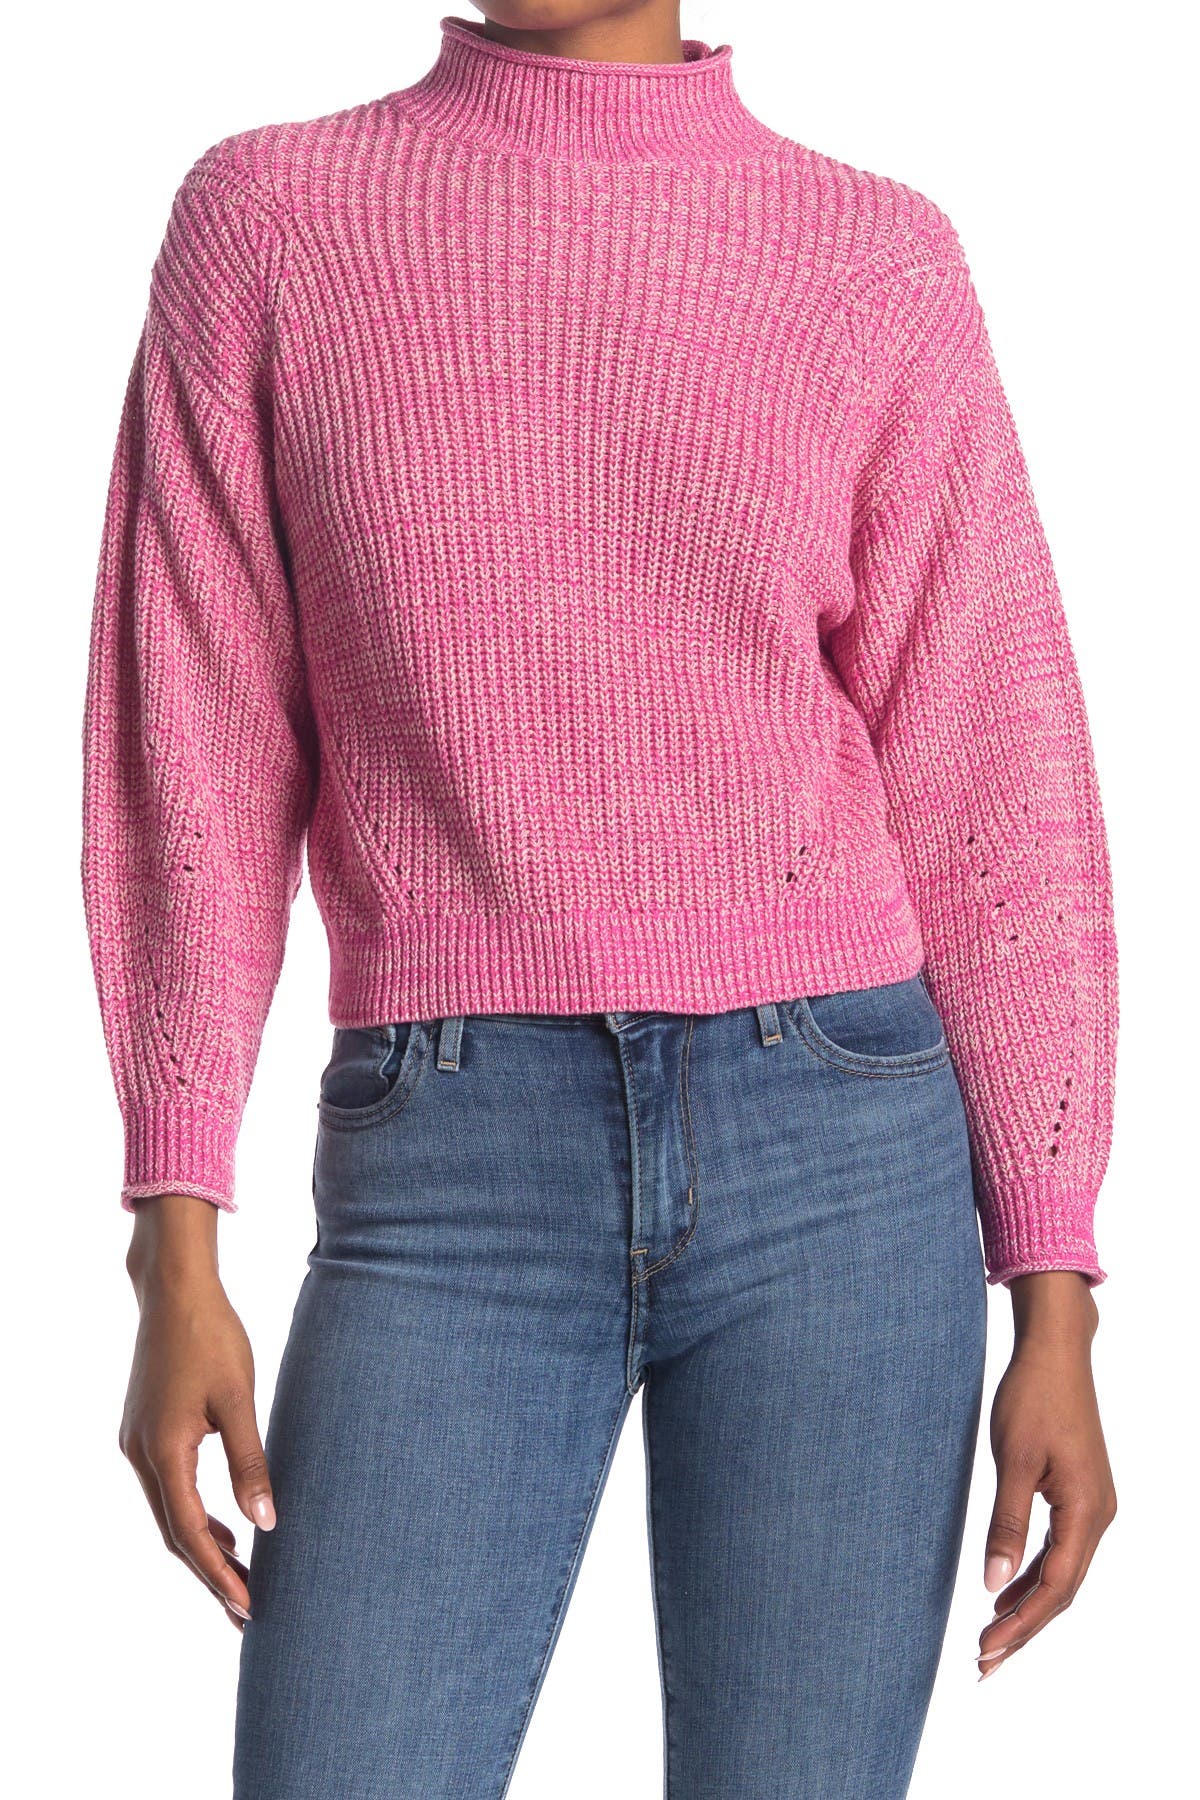 Abound | Easy Stitch Ribbed Knit Mock Neck Sweater | Nordstrom Rack